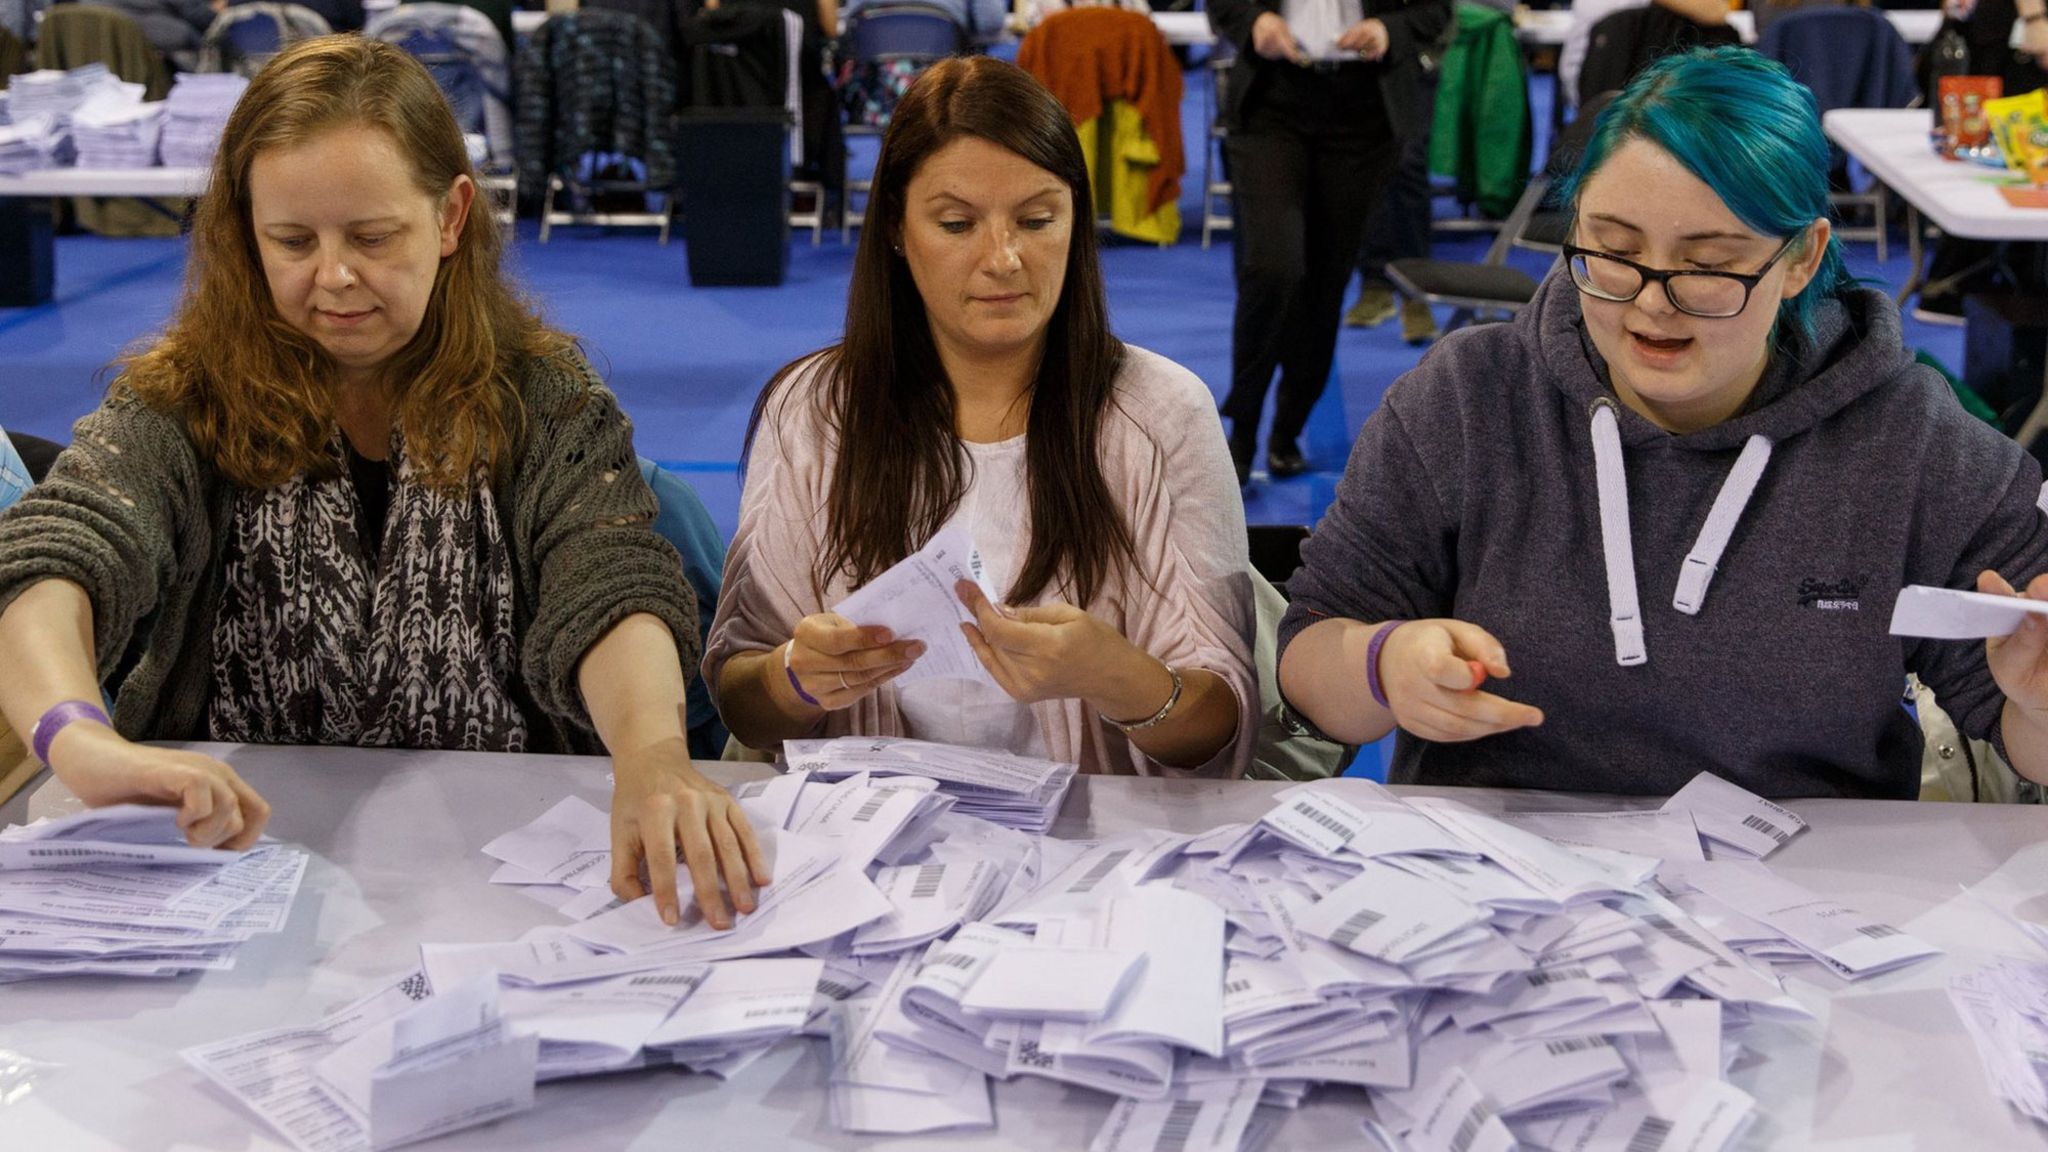 Election officials count votes in Glasgow